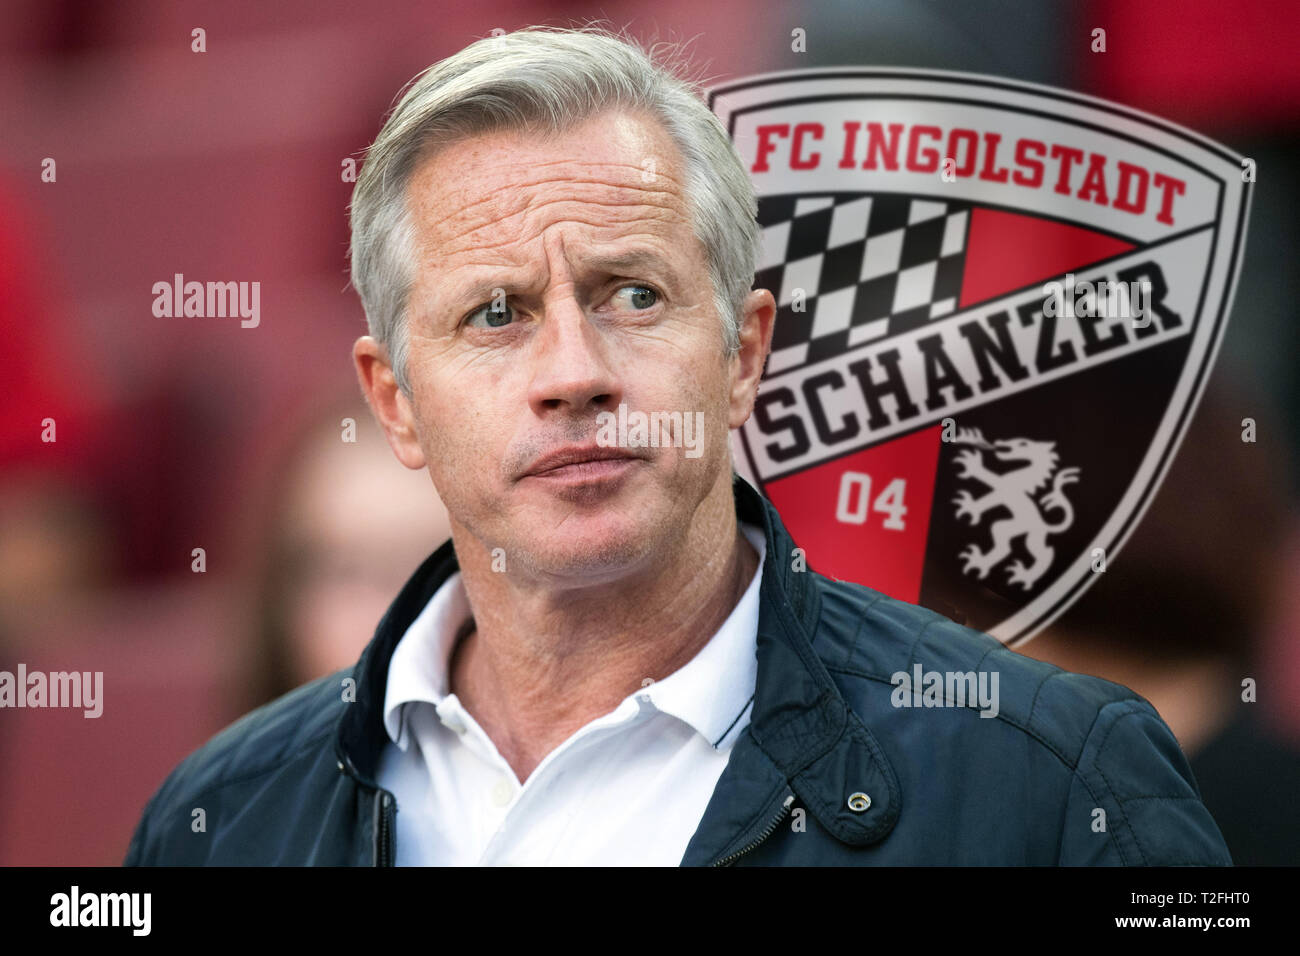 Cologne, Deutschland. 02nd Apr, 2019. FC Ingolstadt relieves coach Jens Keller after just 4 months. PHOTO ASSEMBLY: Jens Keller candidate for the coaching office at FC Ingolstadt. Archive photo: Jens KELLER (football coach) is a guest in the Koeln stadium, spectators, bust, football 2. Bundesliga, 2. matchday, 1.FC Cologne (K) - Union Berlin (Union) 1: 1, on 13.08.2018 in Cologne, Germany. Ã,ÂAAÃ | | usage worldwide Credit: dpa/Alamy Live News Stock Photo